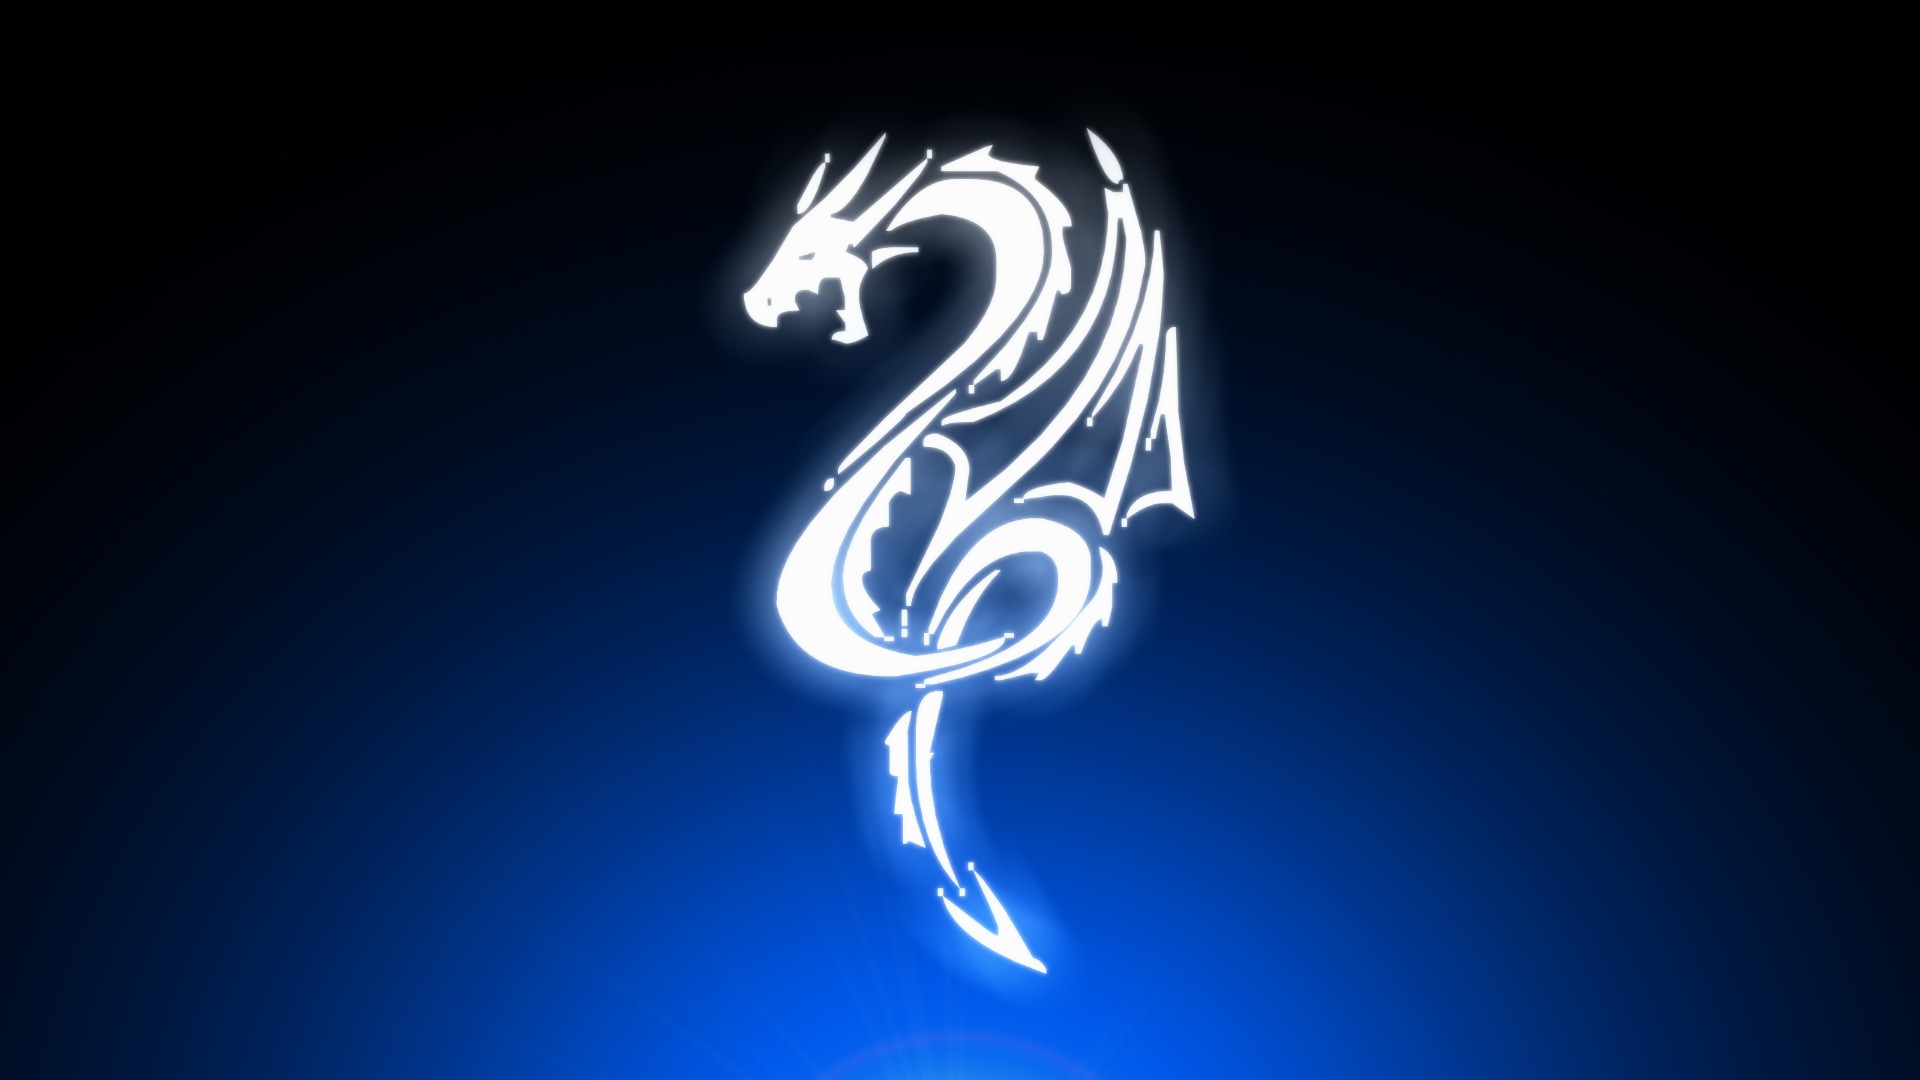 Digitalart wallpapers, blue wallpapers. White Dragon by Extraterrien on DeviantArt